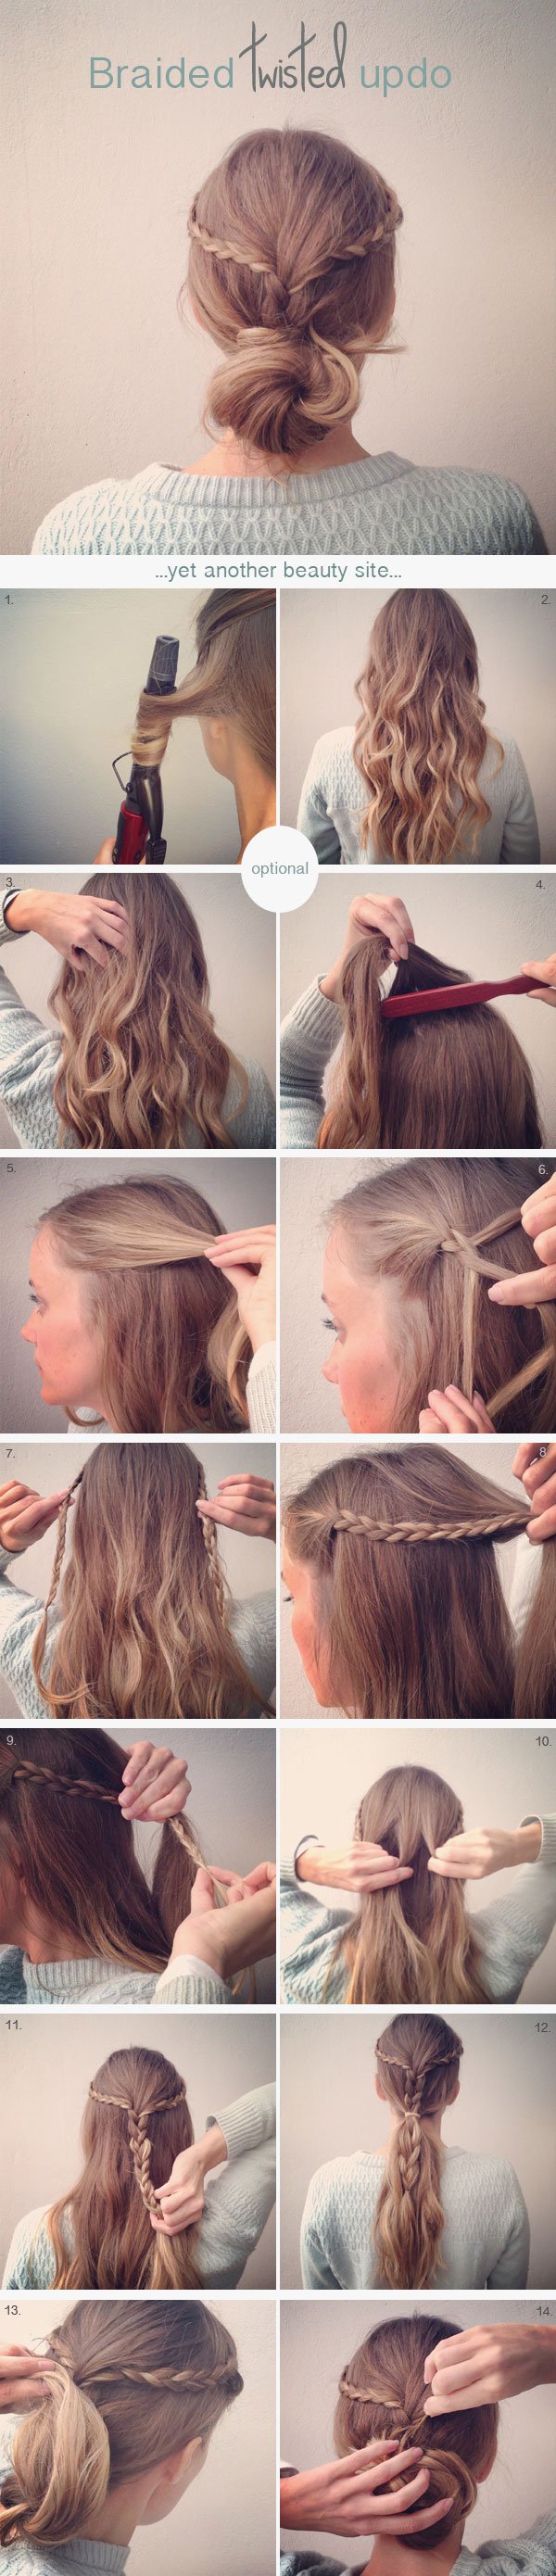 Loose Twisted Updo with Braid